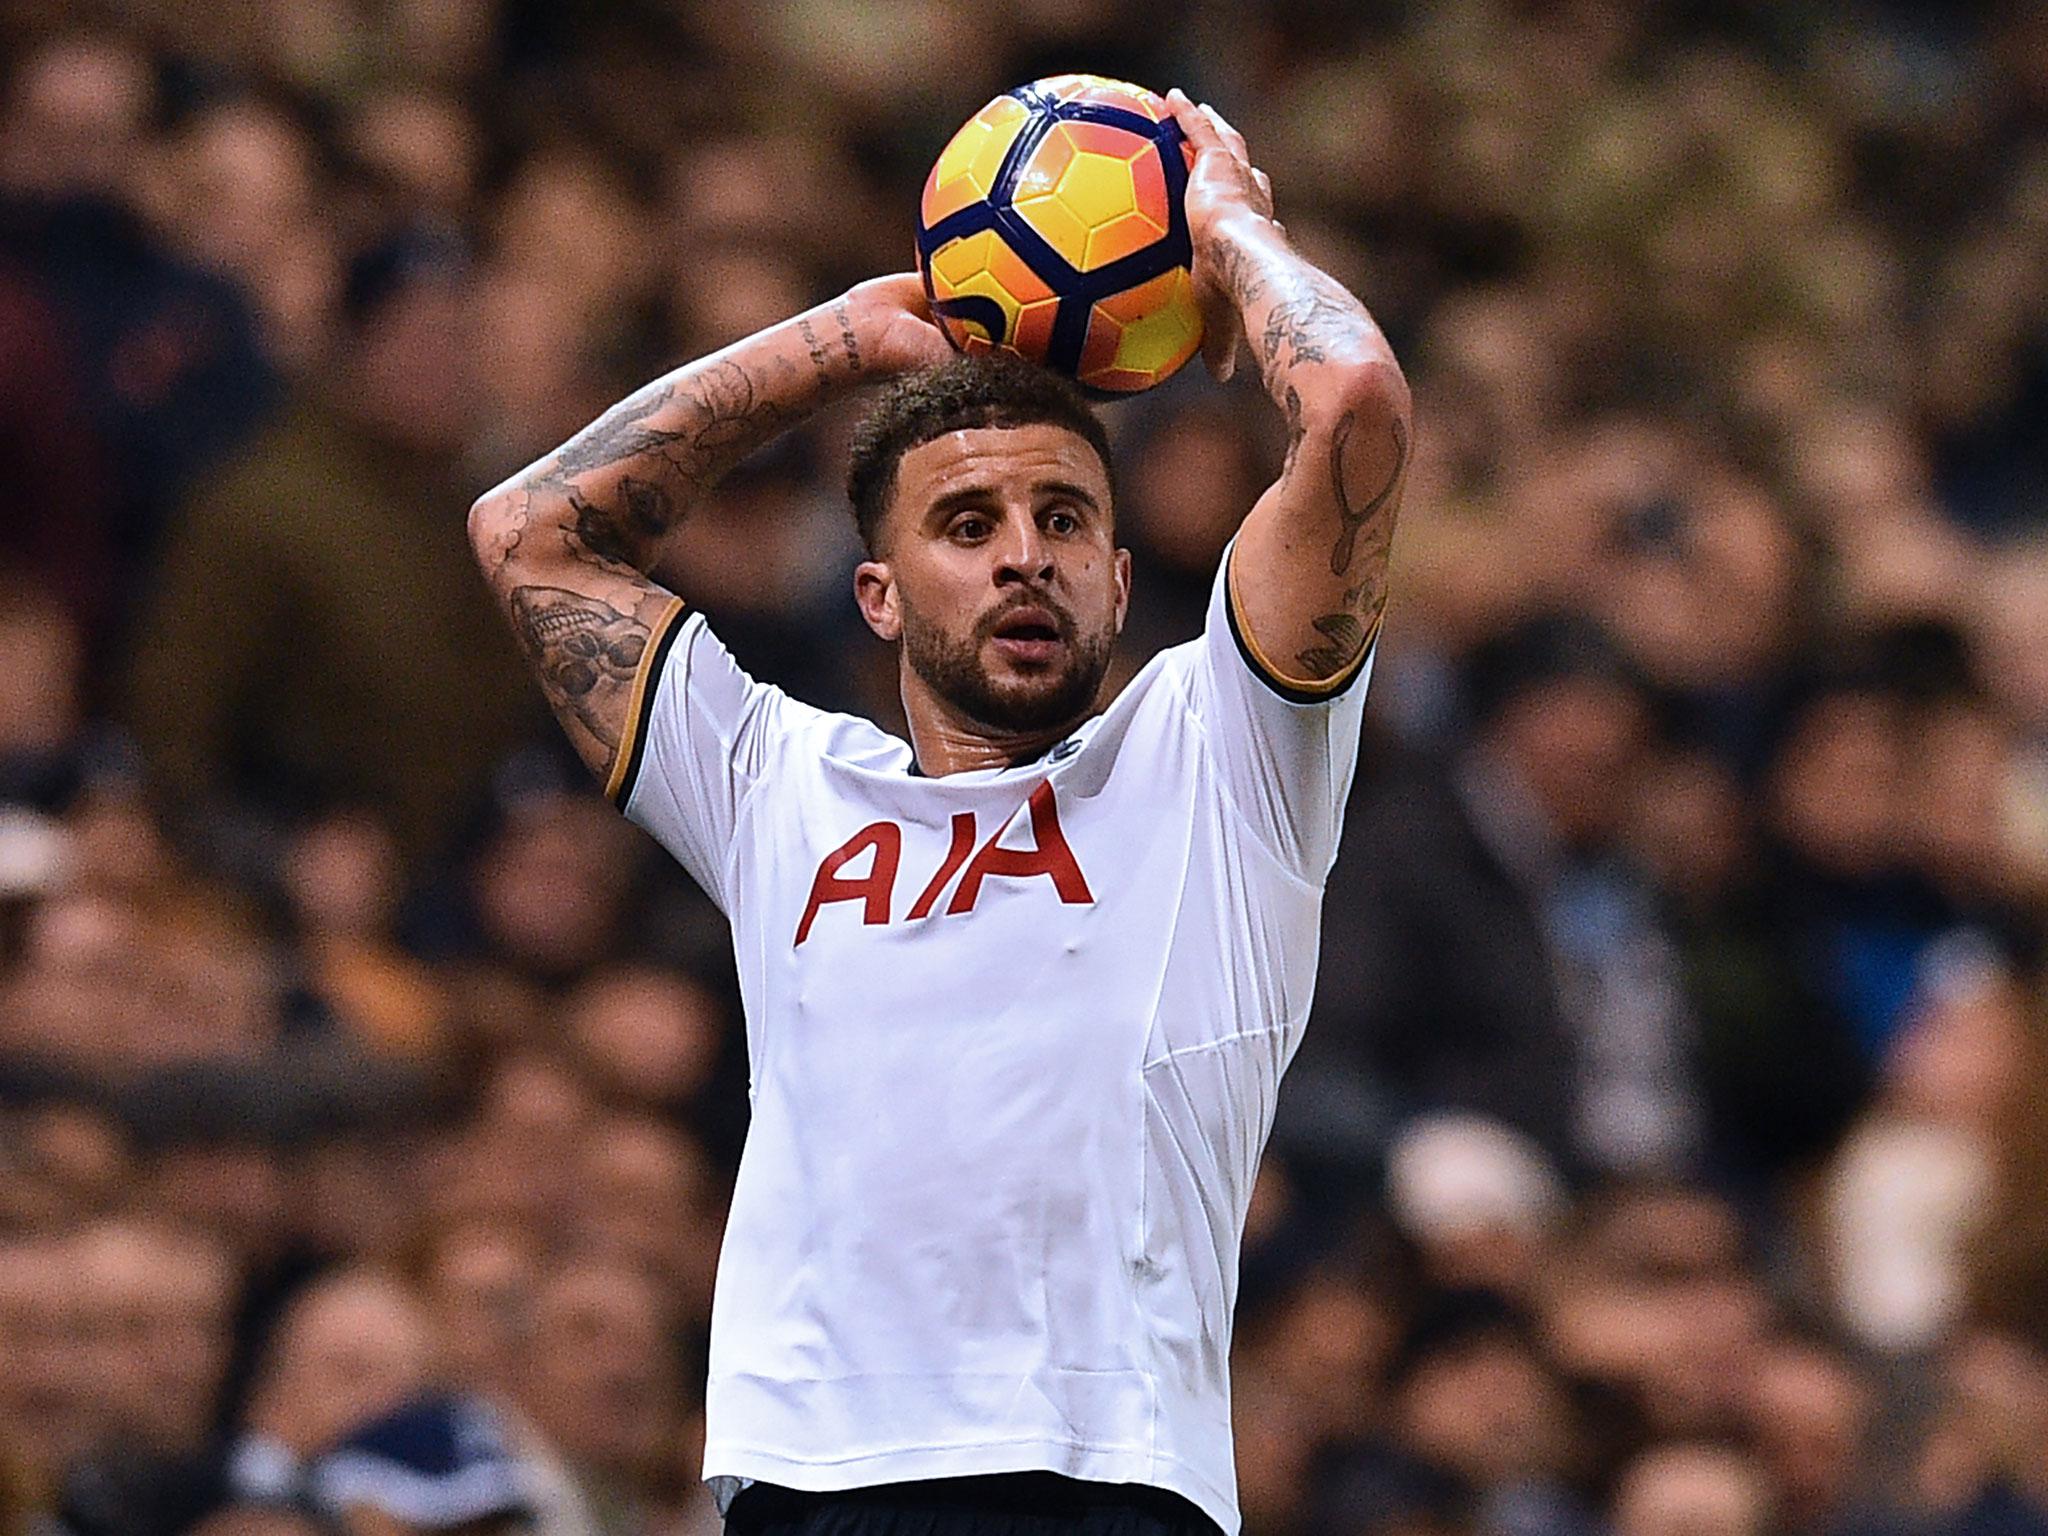 Kyle Walker is a reported transfer target for Manchester United and Manchester City